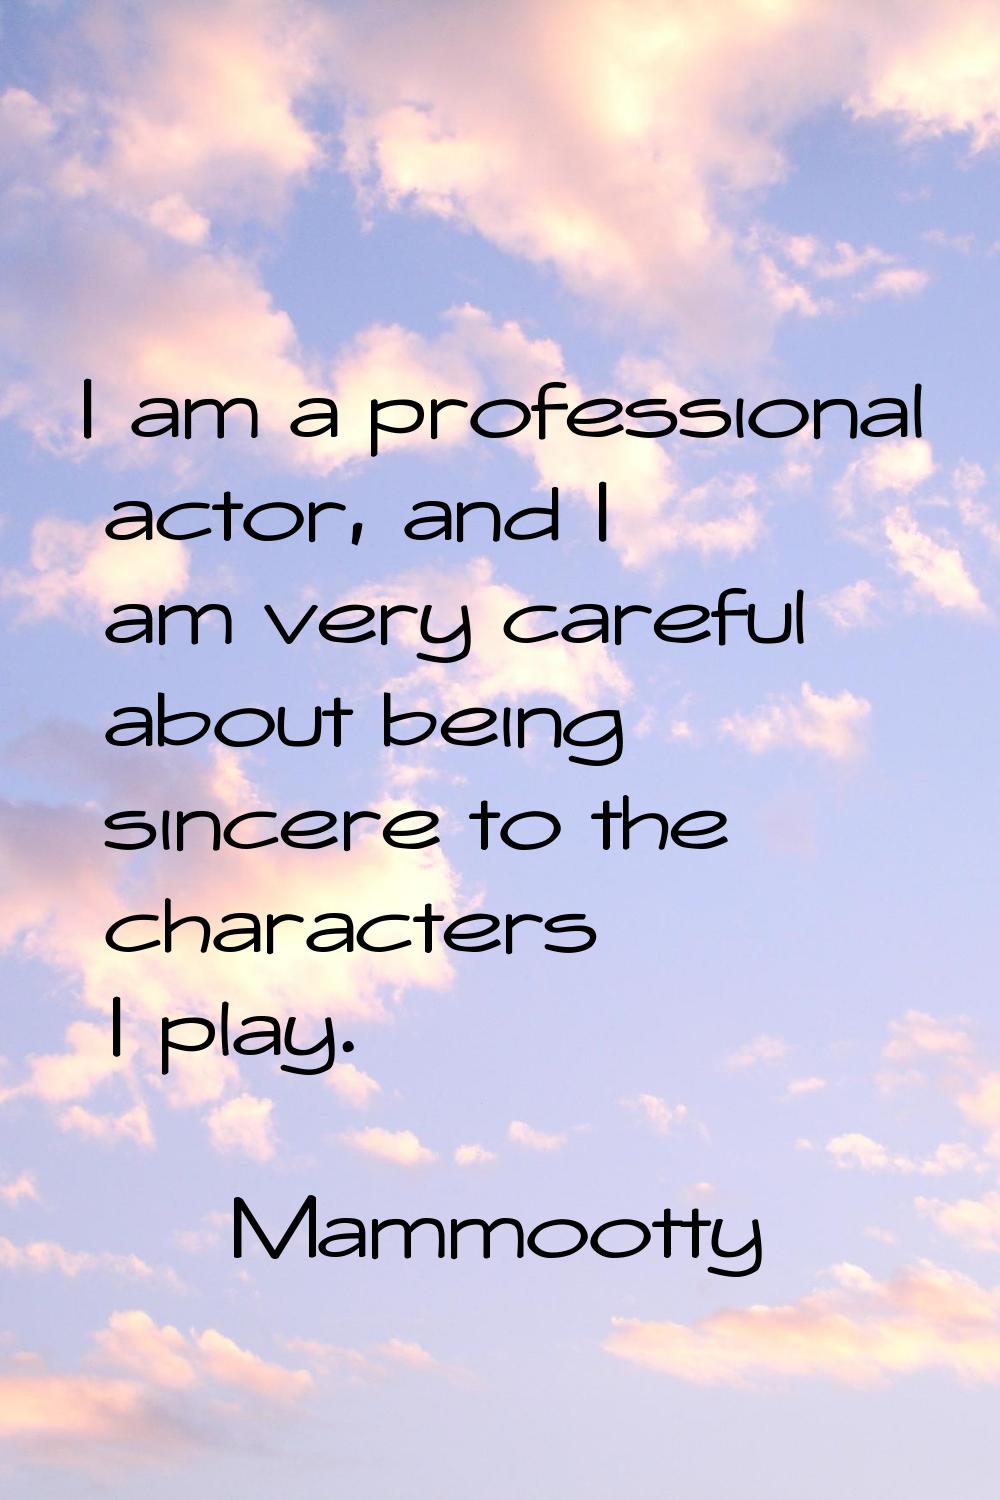 I am a professional actor, and I am very careful about being sincere to the characters I play.